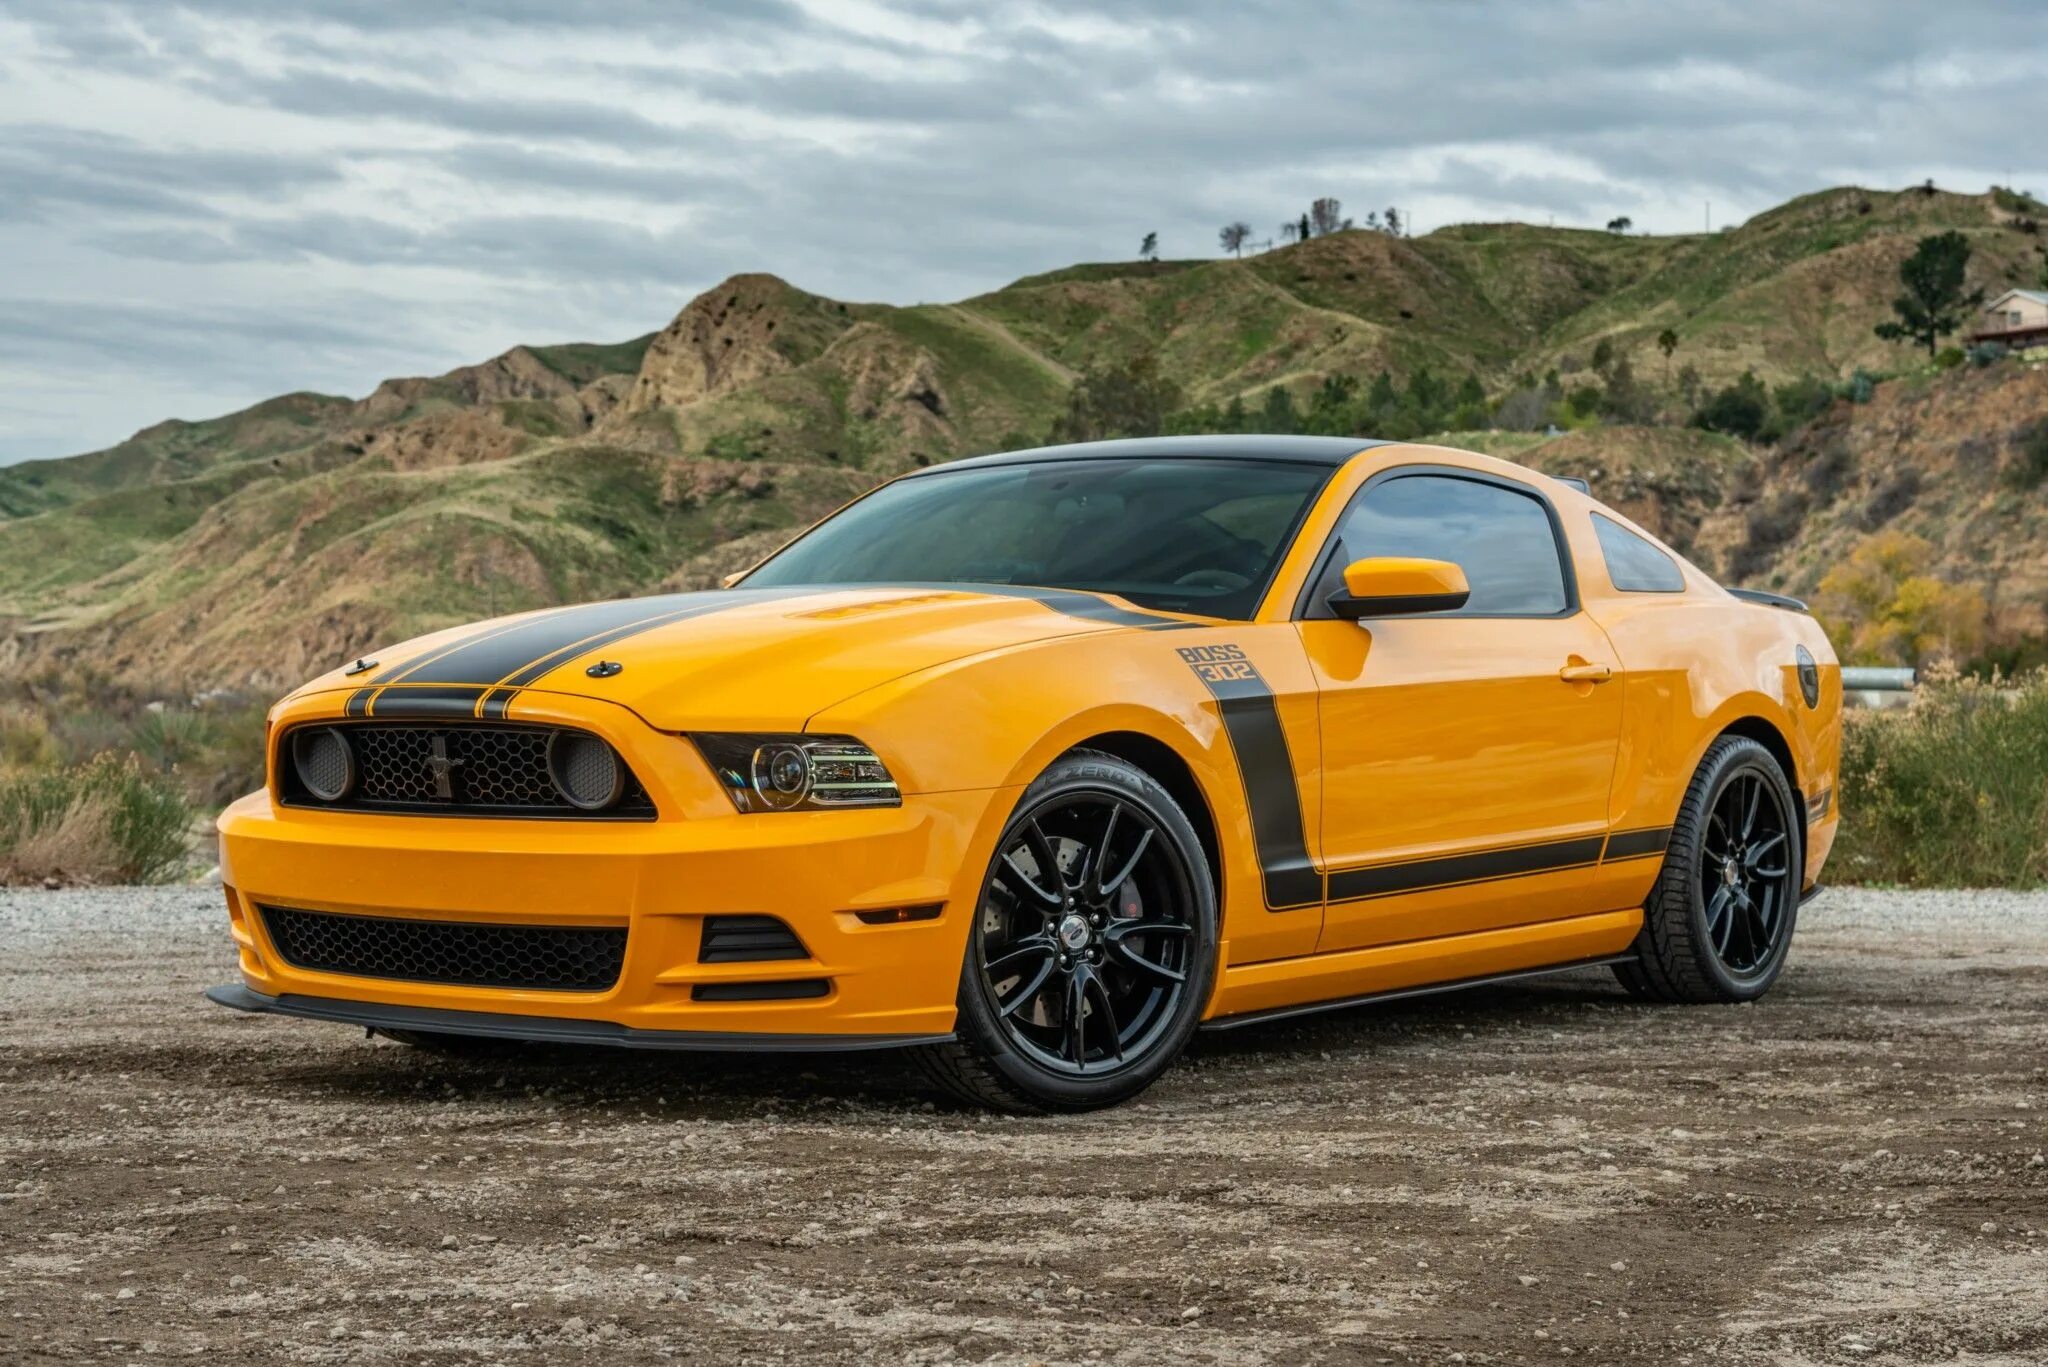 Форд Мустанг Boss 302. Ford Mustang Boss 302 2013. Форд Мустанг босс 302 2013. Ford Mustang Boss 302 Mustang. Мустанг на русском языке